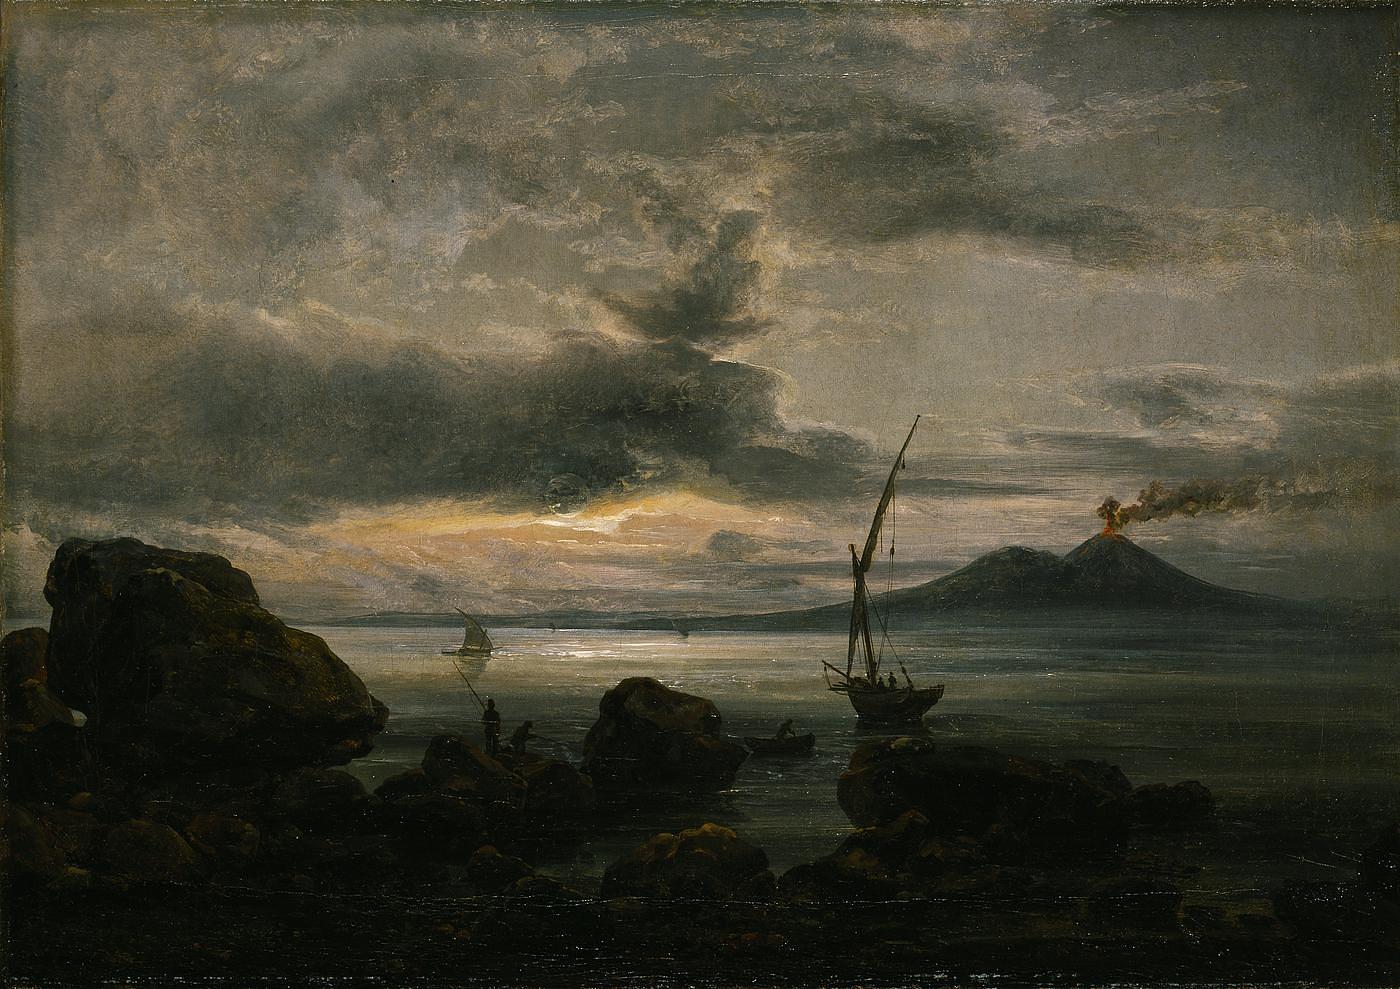 The Bay of Naples by Moonlight and Vesuvius in Eruption, B178